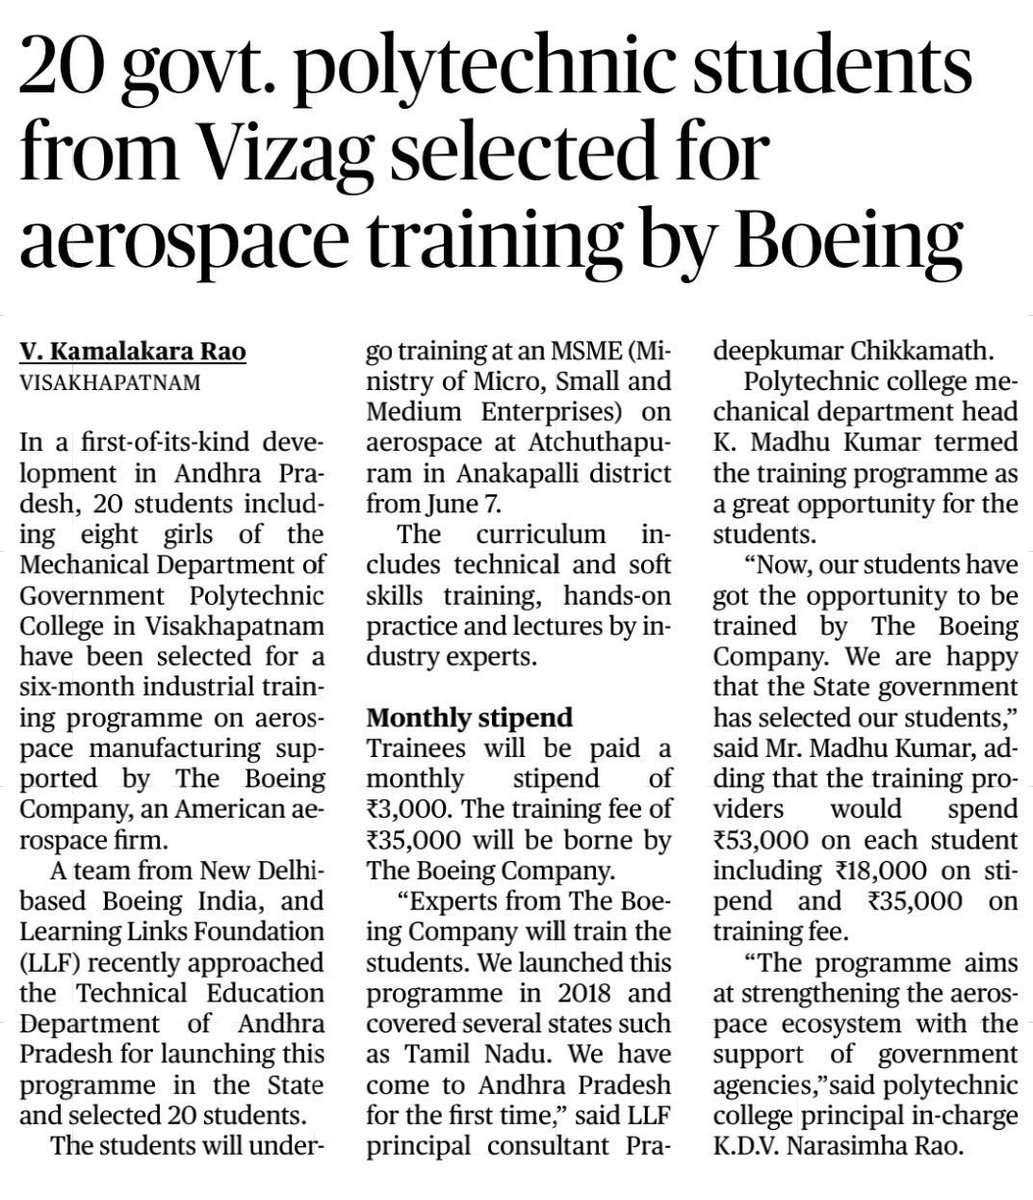 A group of 20 students from the Mechanical Department of Government Polytechnic College in Visakhapatnam have been selected for a six-month industrial training program on aerospace manufacturing at Boeing.

#AndhraPradesh #AdvantageAP